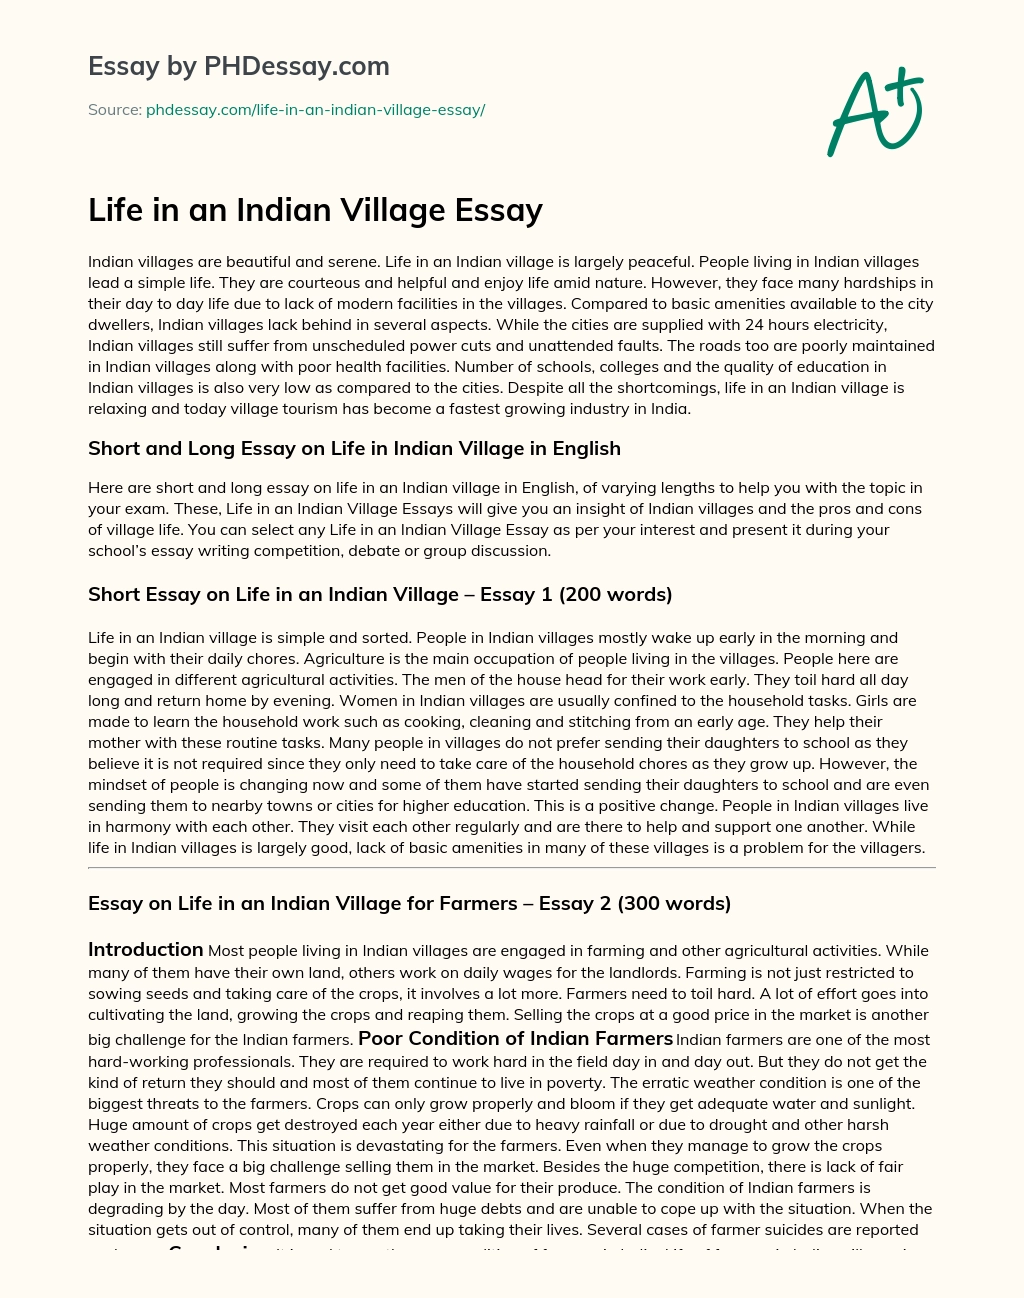 Life in an Indian Village Essay essay